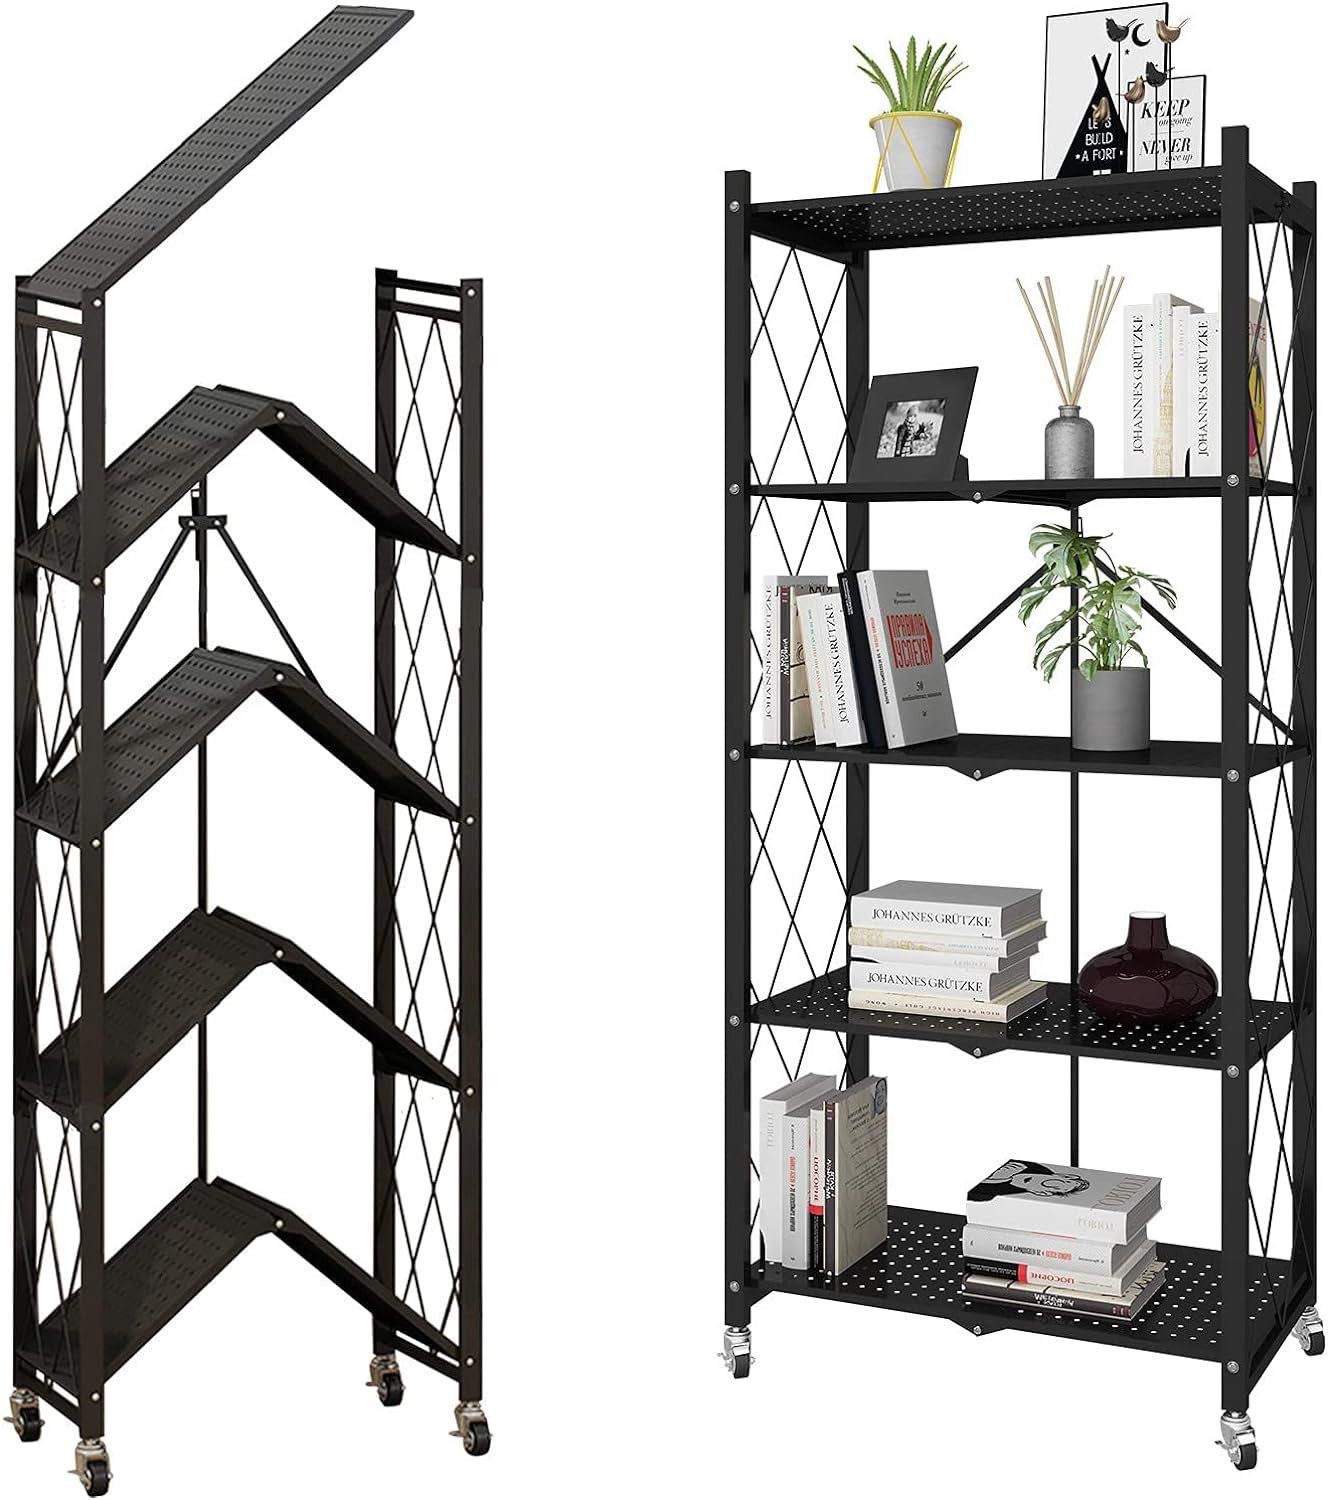 Foldable Metal Heavy Duty Storage Shelves with Wheels There are 3, 4, and 5 layers (white and black)$35、$45、$55